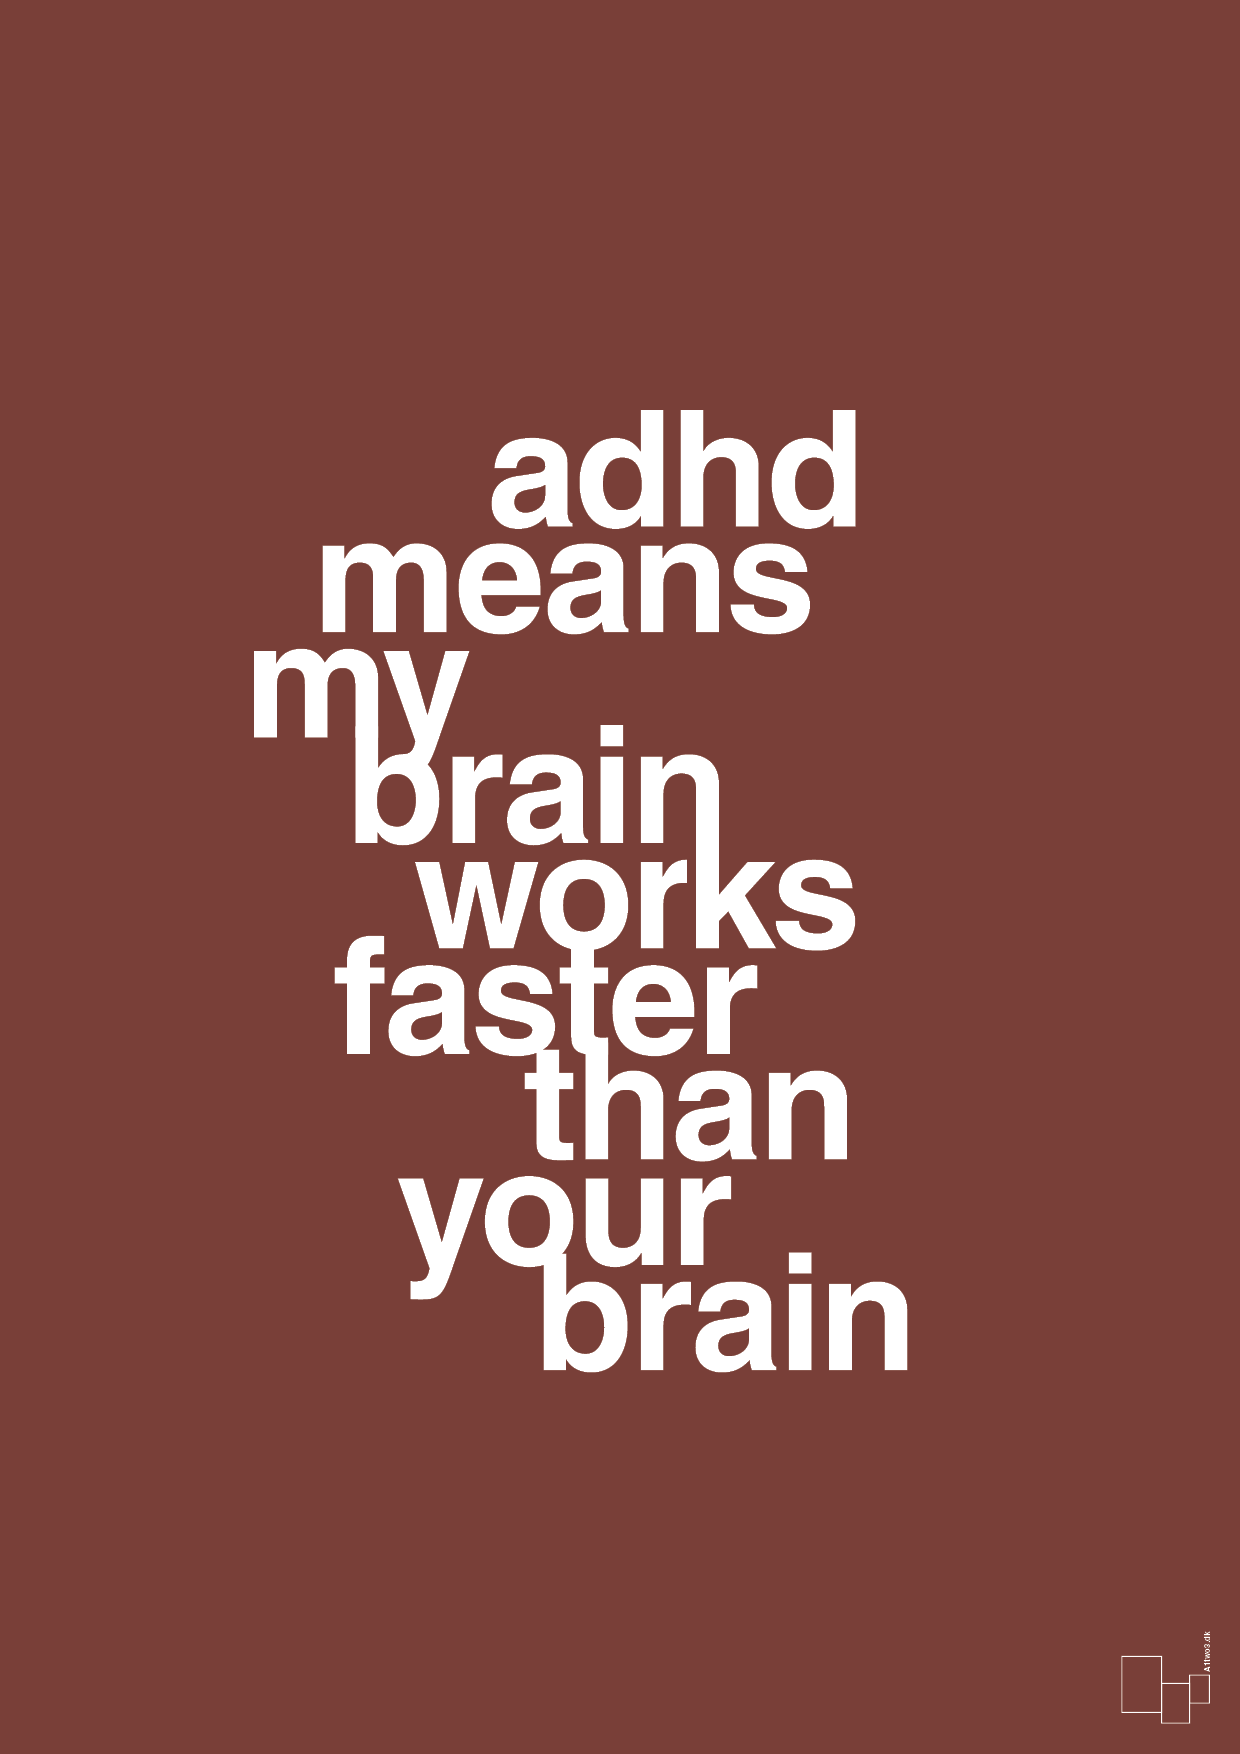 adhd means my brain works faster than your brain - Plakat med Samfund i Red Pepper